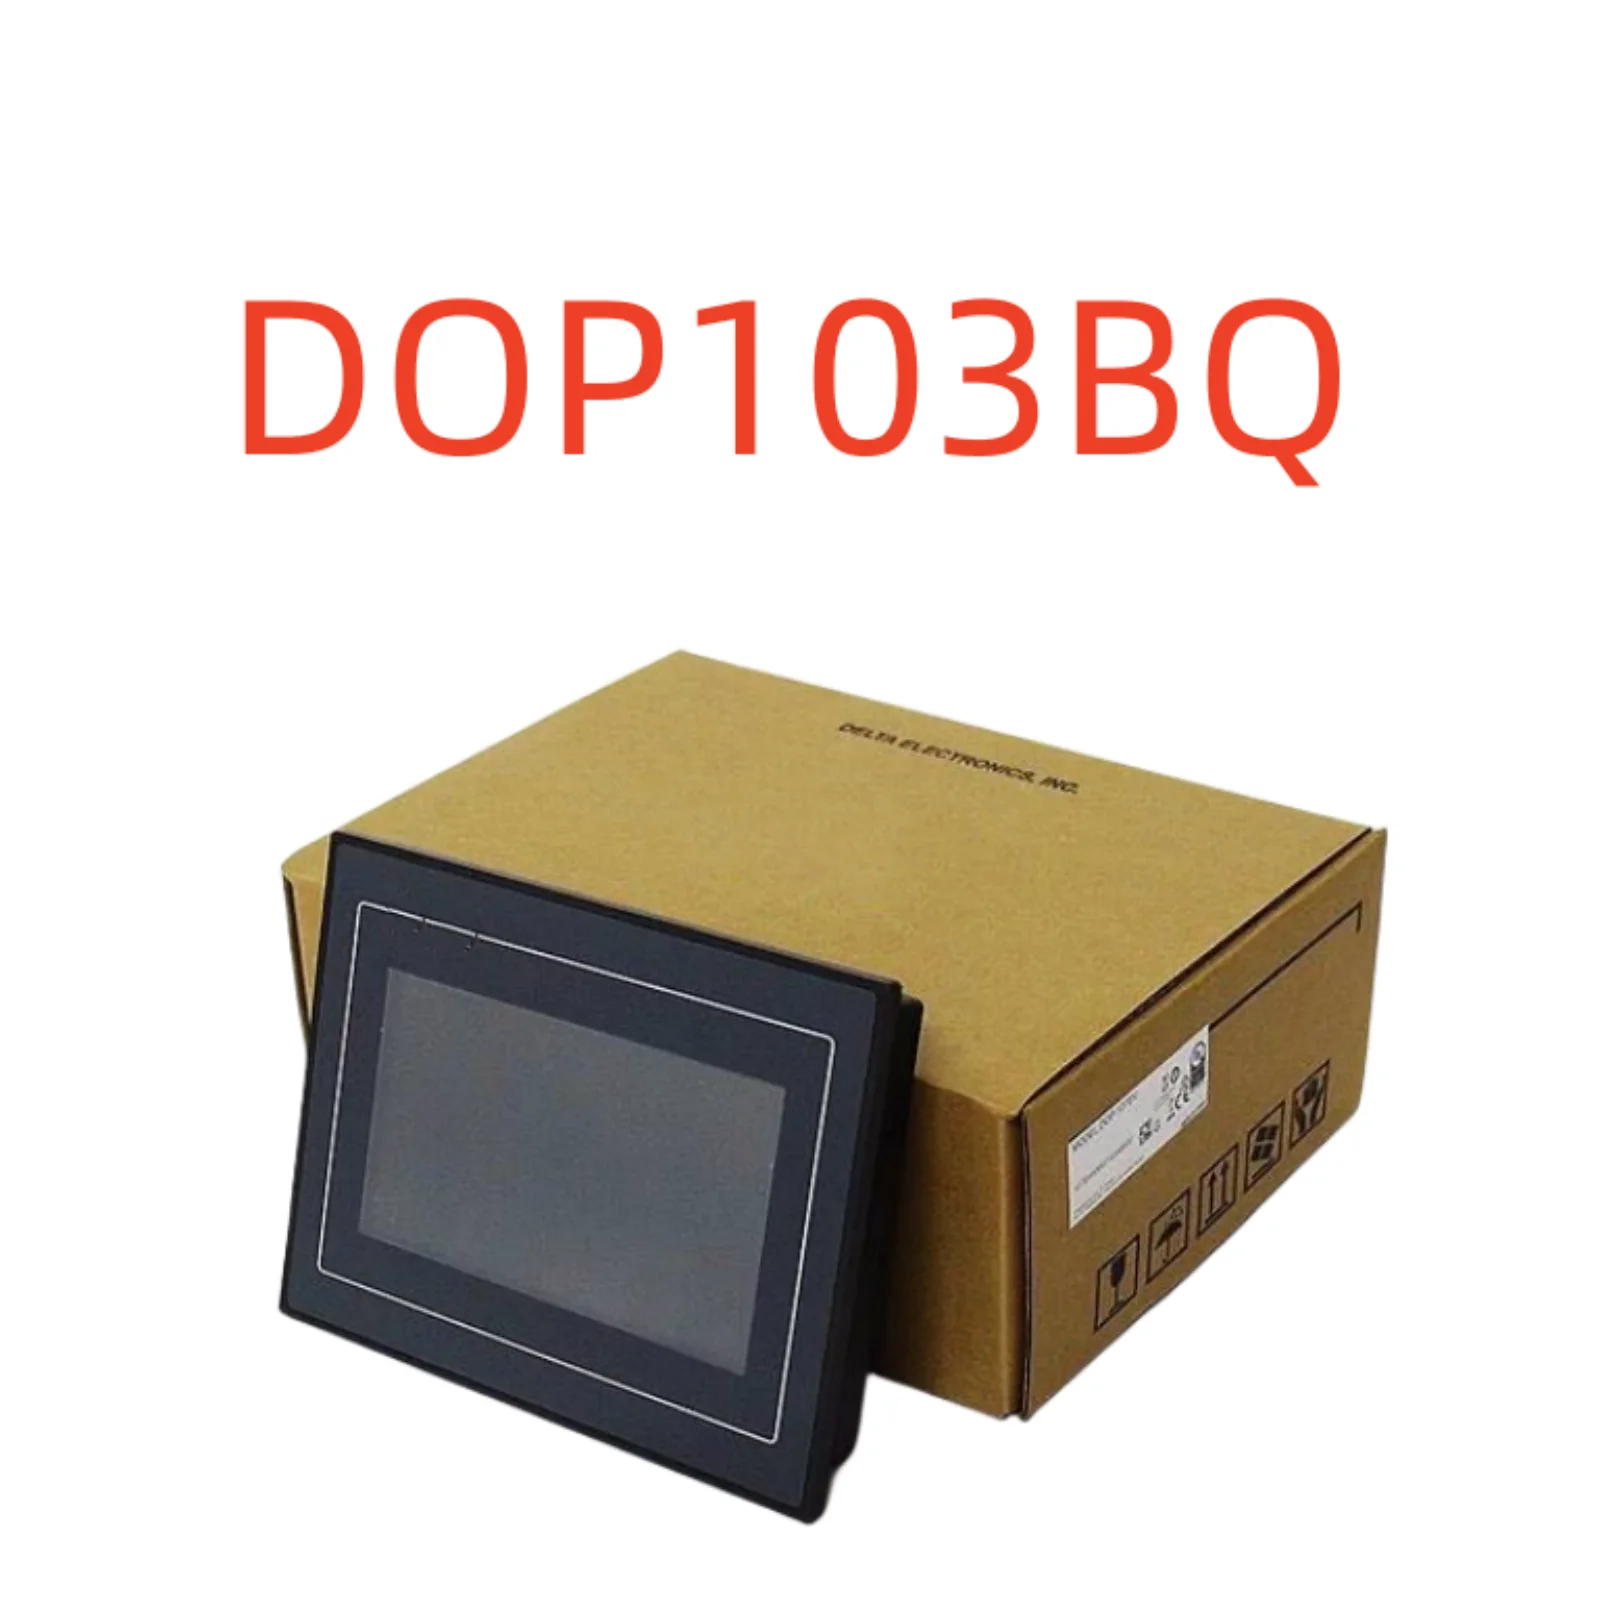 

DOP103BQ DOP-103BQ DOP-103WQ DOP103WQ DOP 103BQ EA-070B EA070B Only Sell The Brand New Original